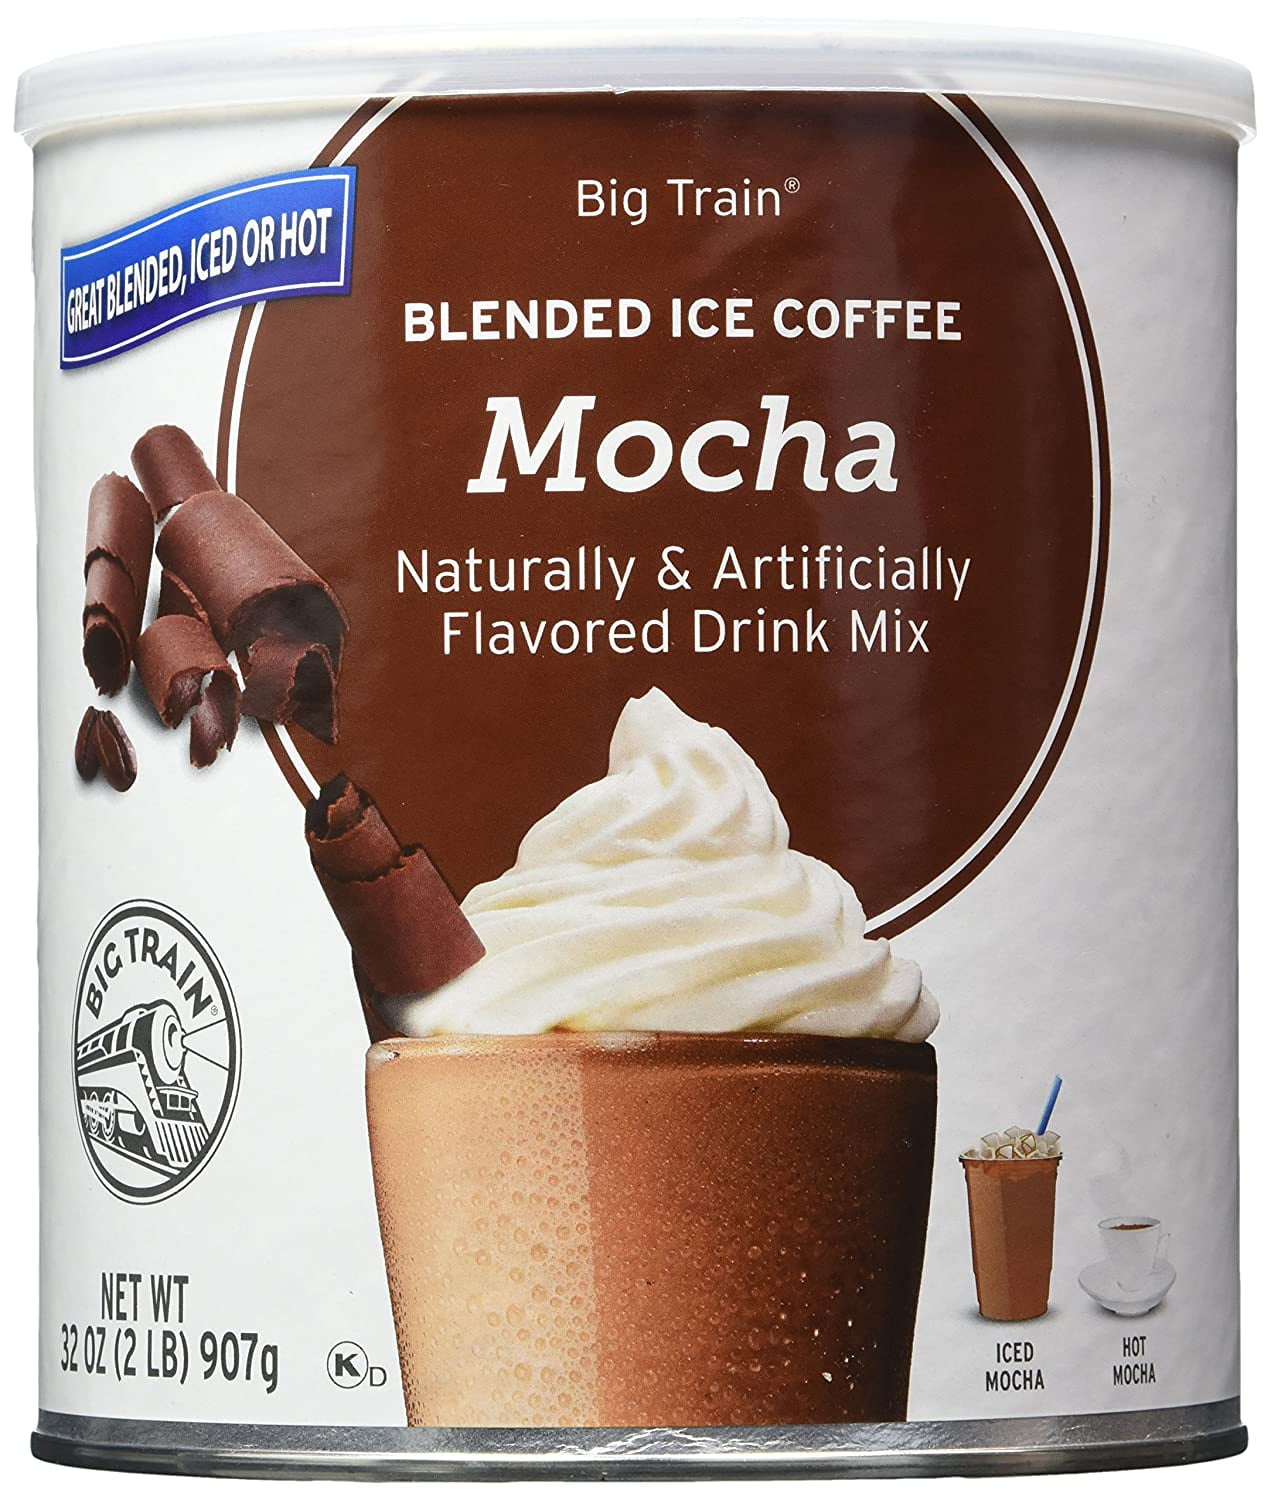 Big Train Blended Ice Coffee, Mocha, 2 Pound, Powdered Instant Coffee Drink Mix, Serve Hot or Cold, Makes Blended Frappe Drinks